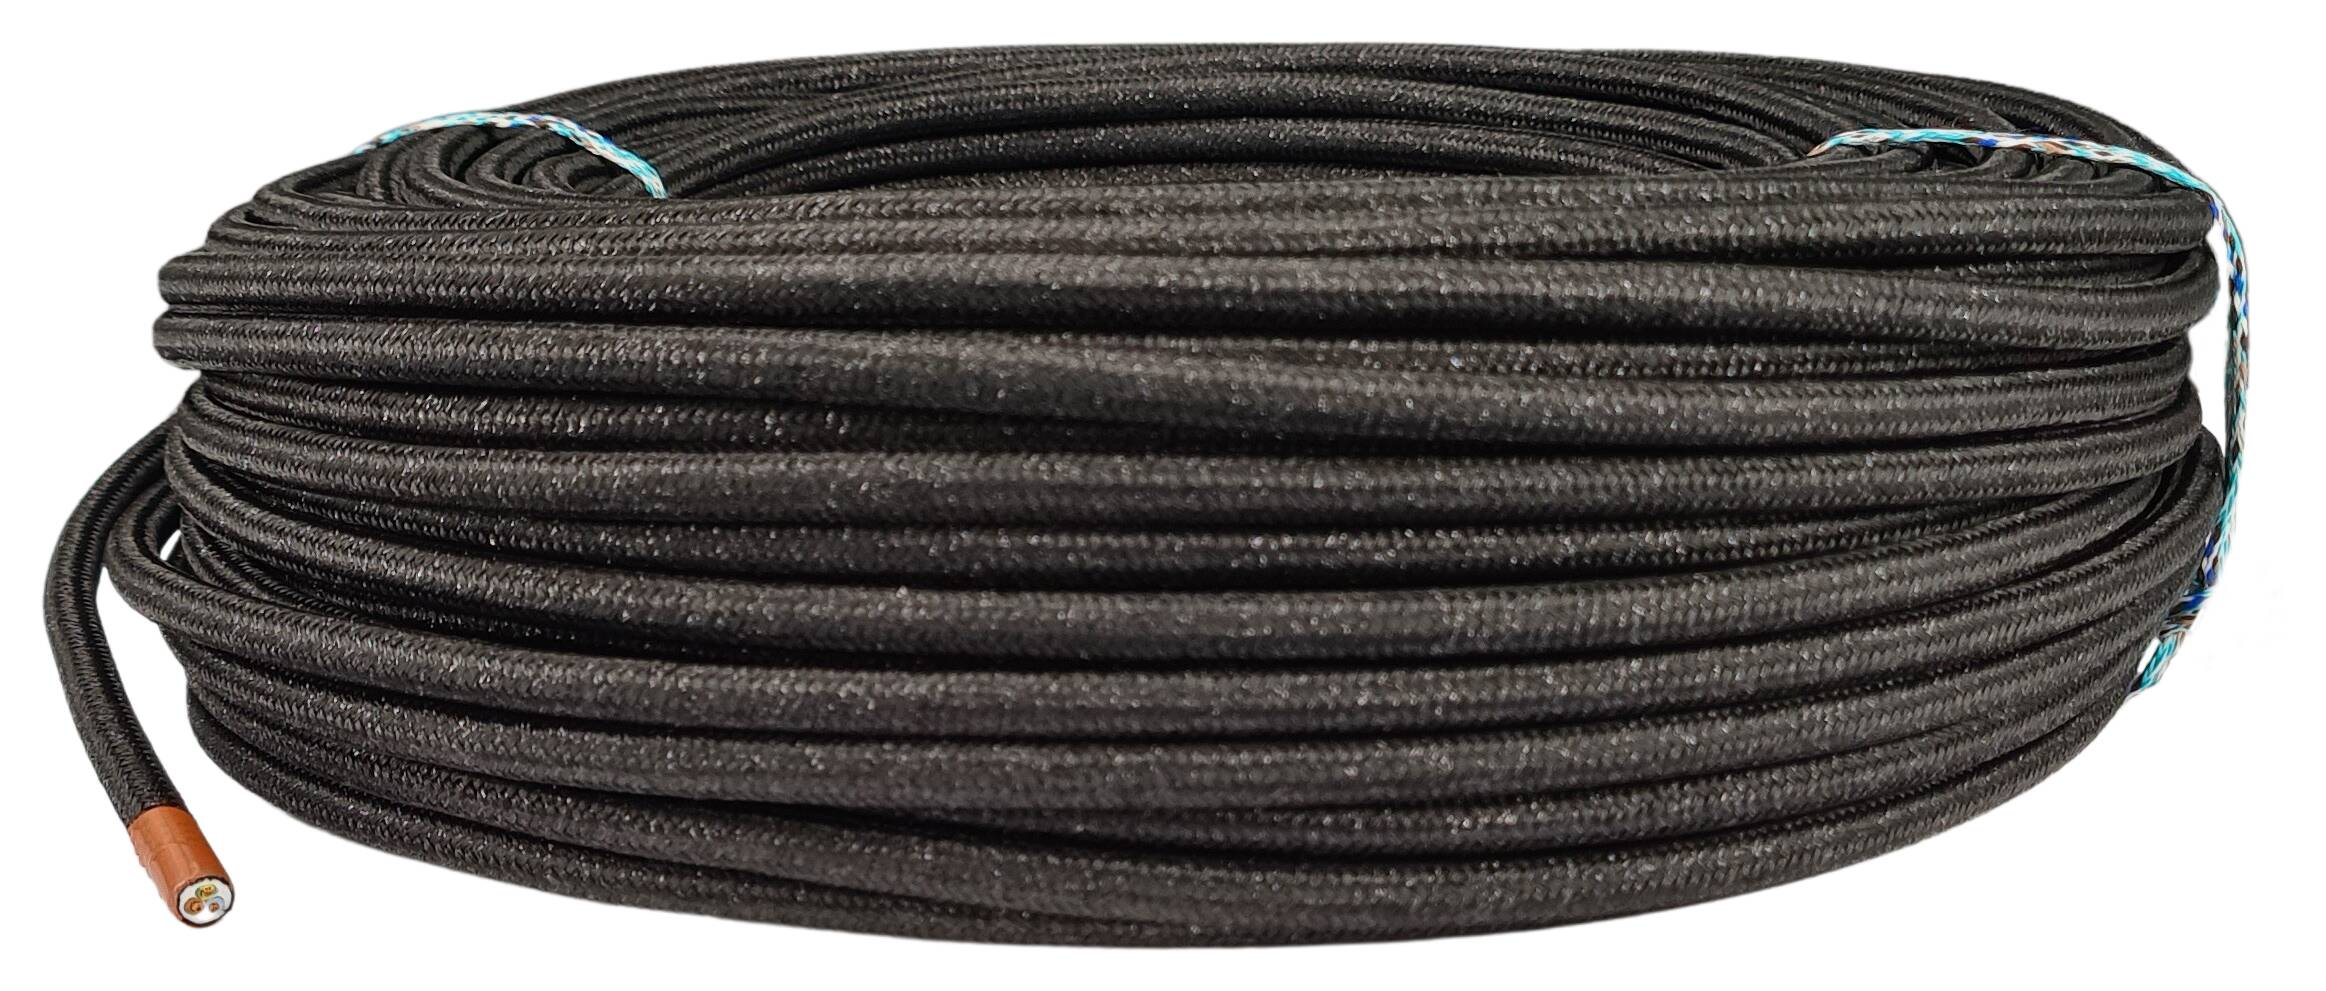 cable 3G 0,75 H03VV-F textile braided metallic RAL 9005 black